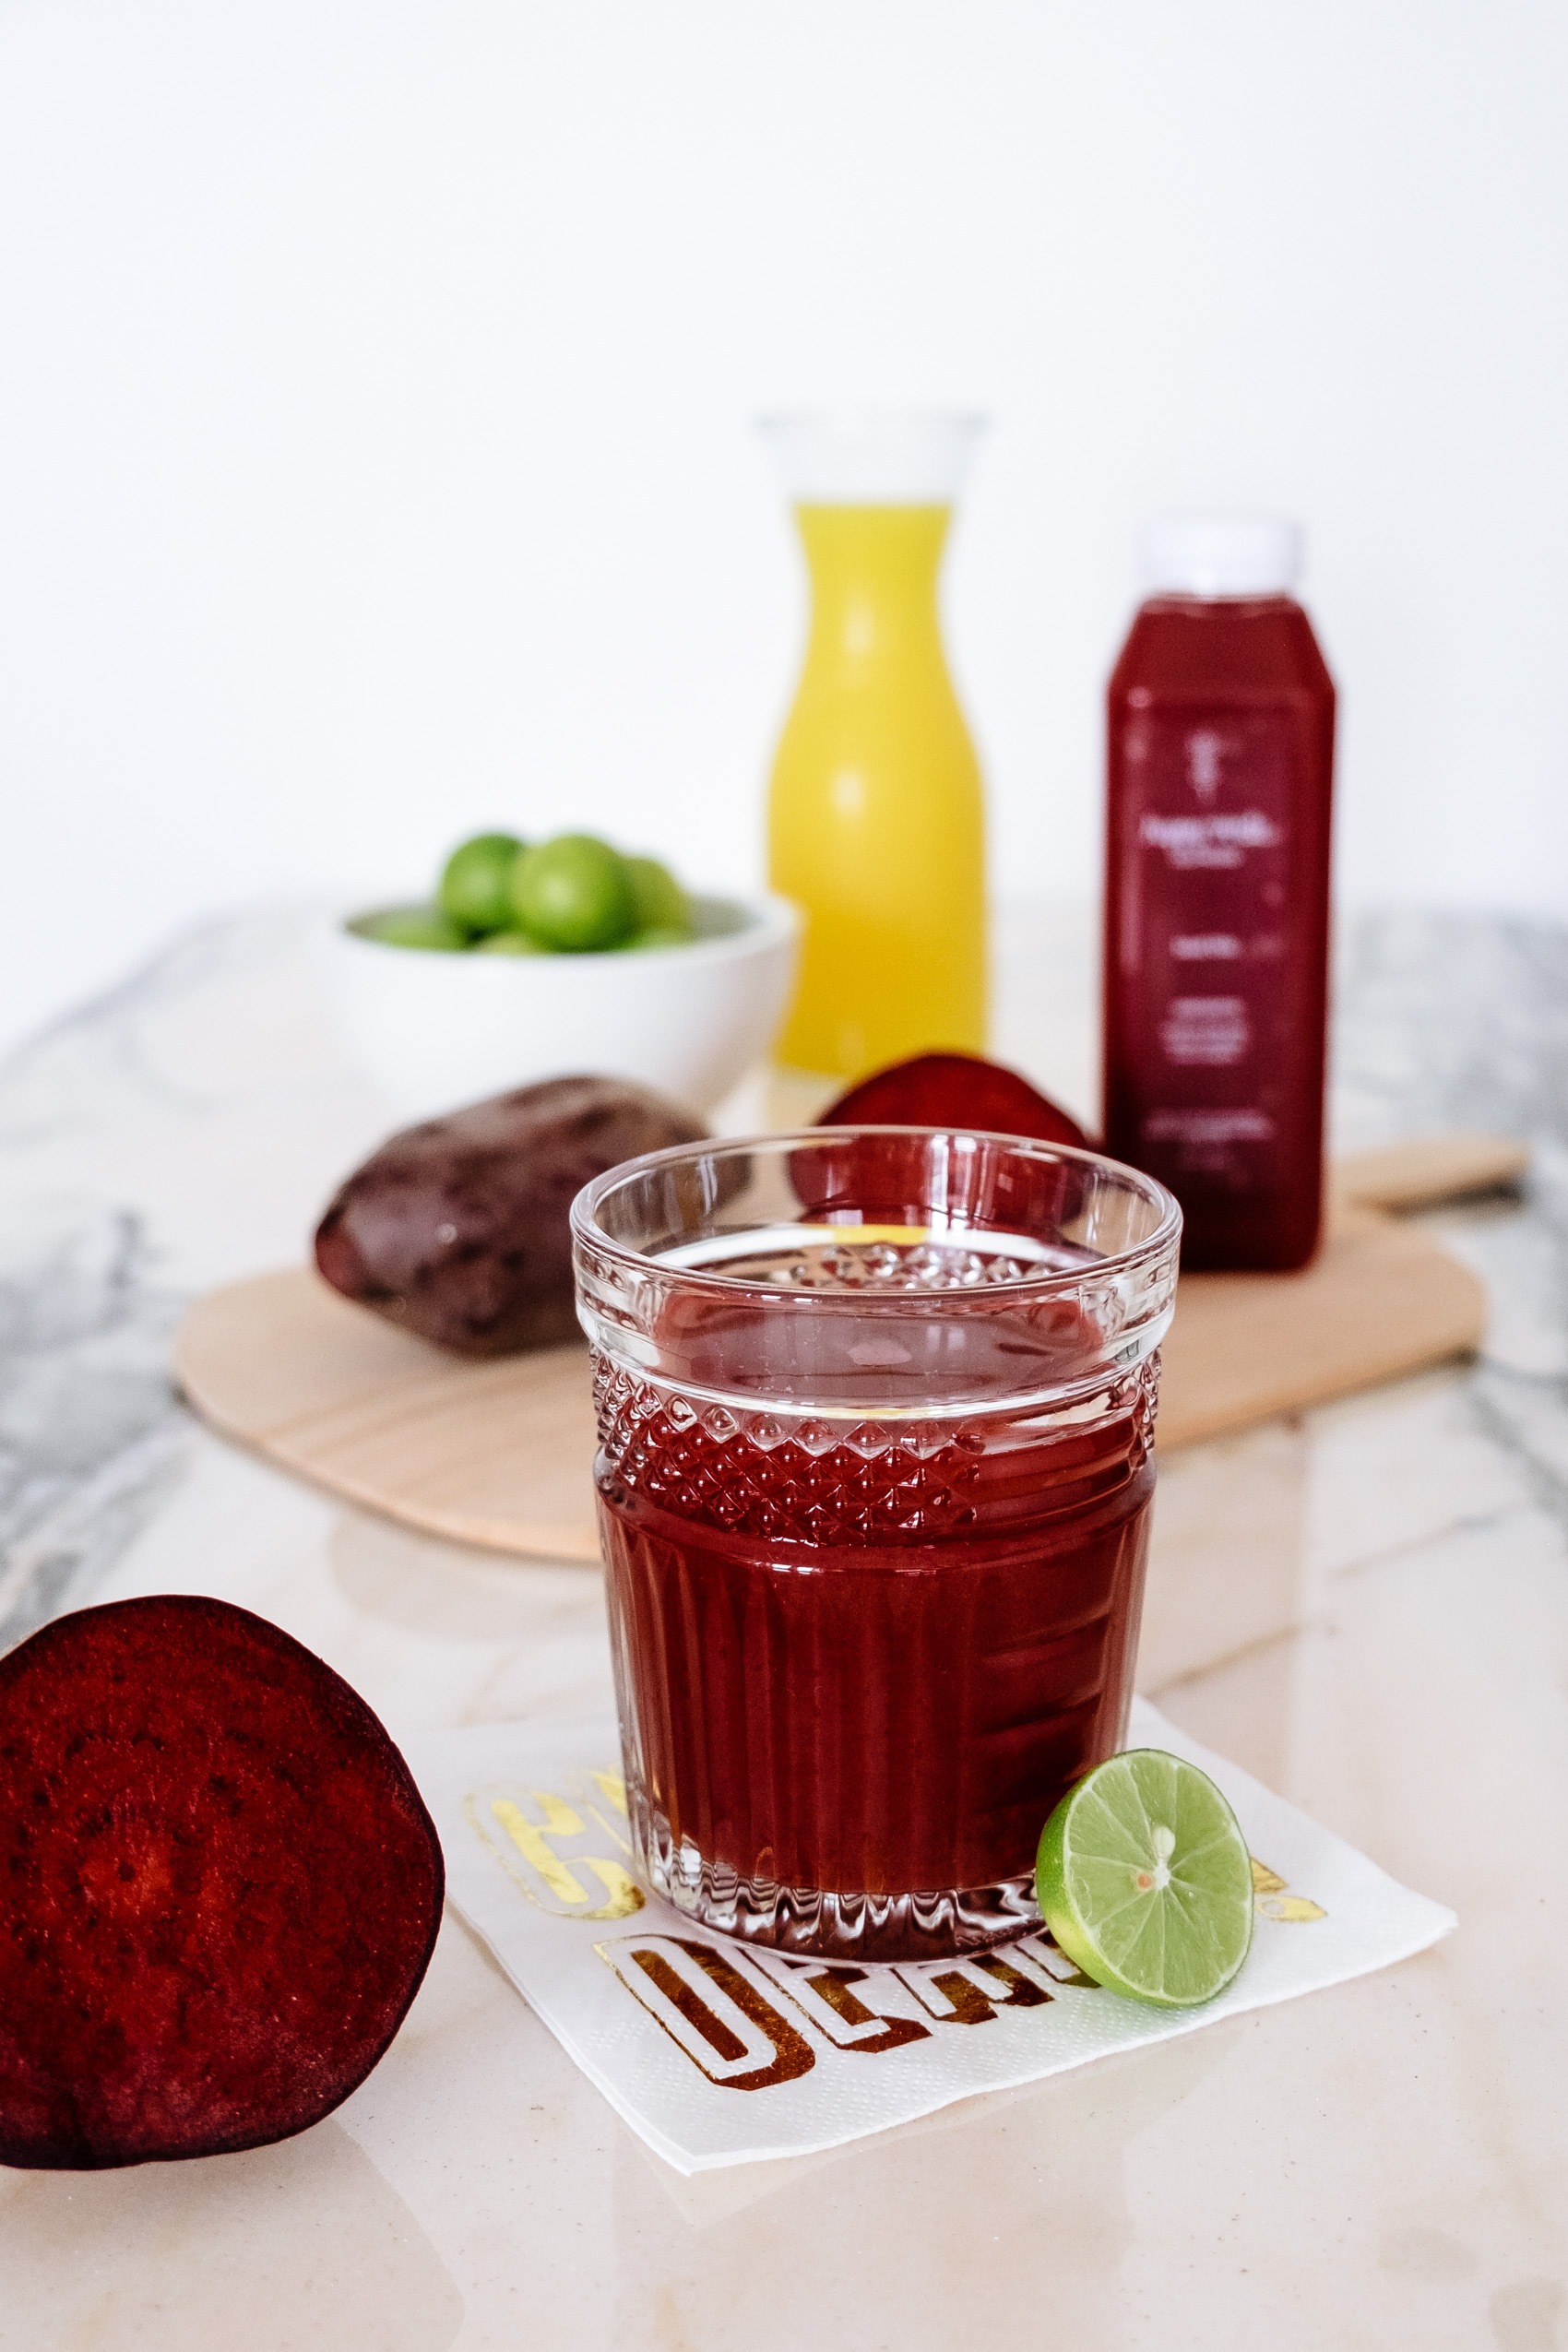 "Beet This" cold-pressed juice by Happy Verde with beets, lemon, orange and carrots for a radiant complexion.